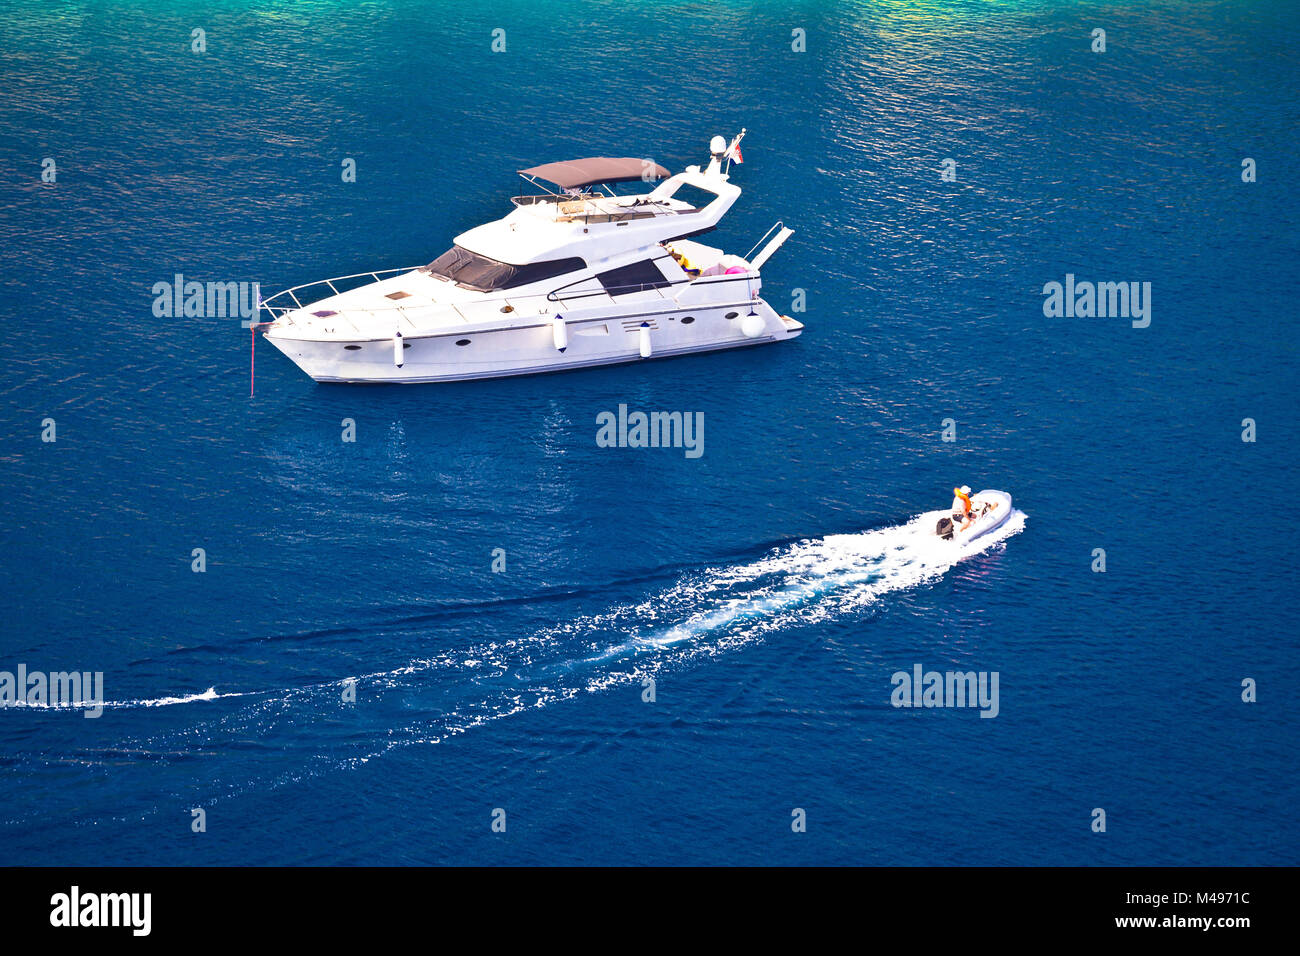 Yachting on blue sea aerial view Stock Photo